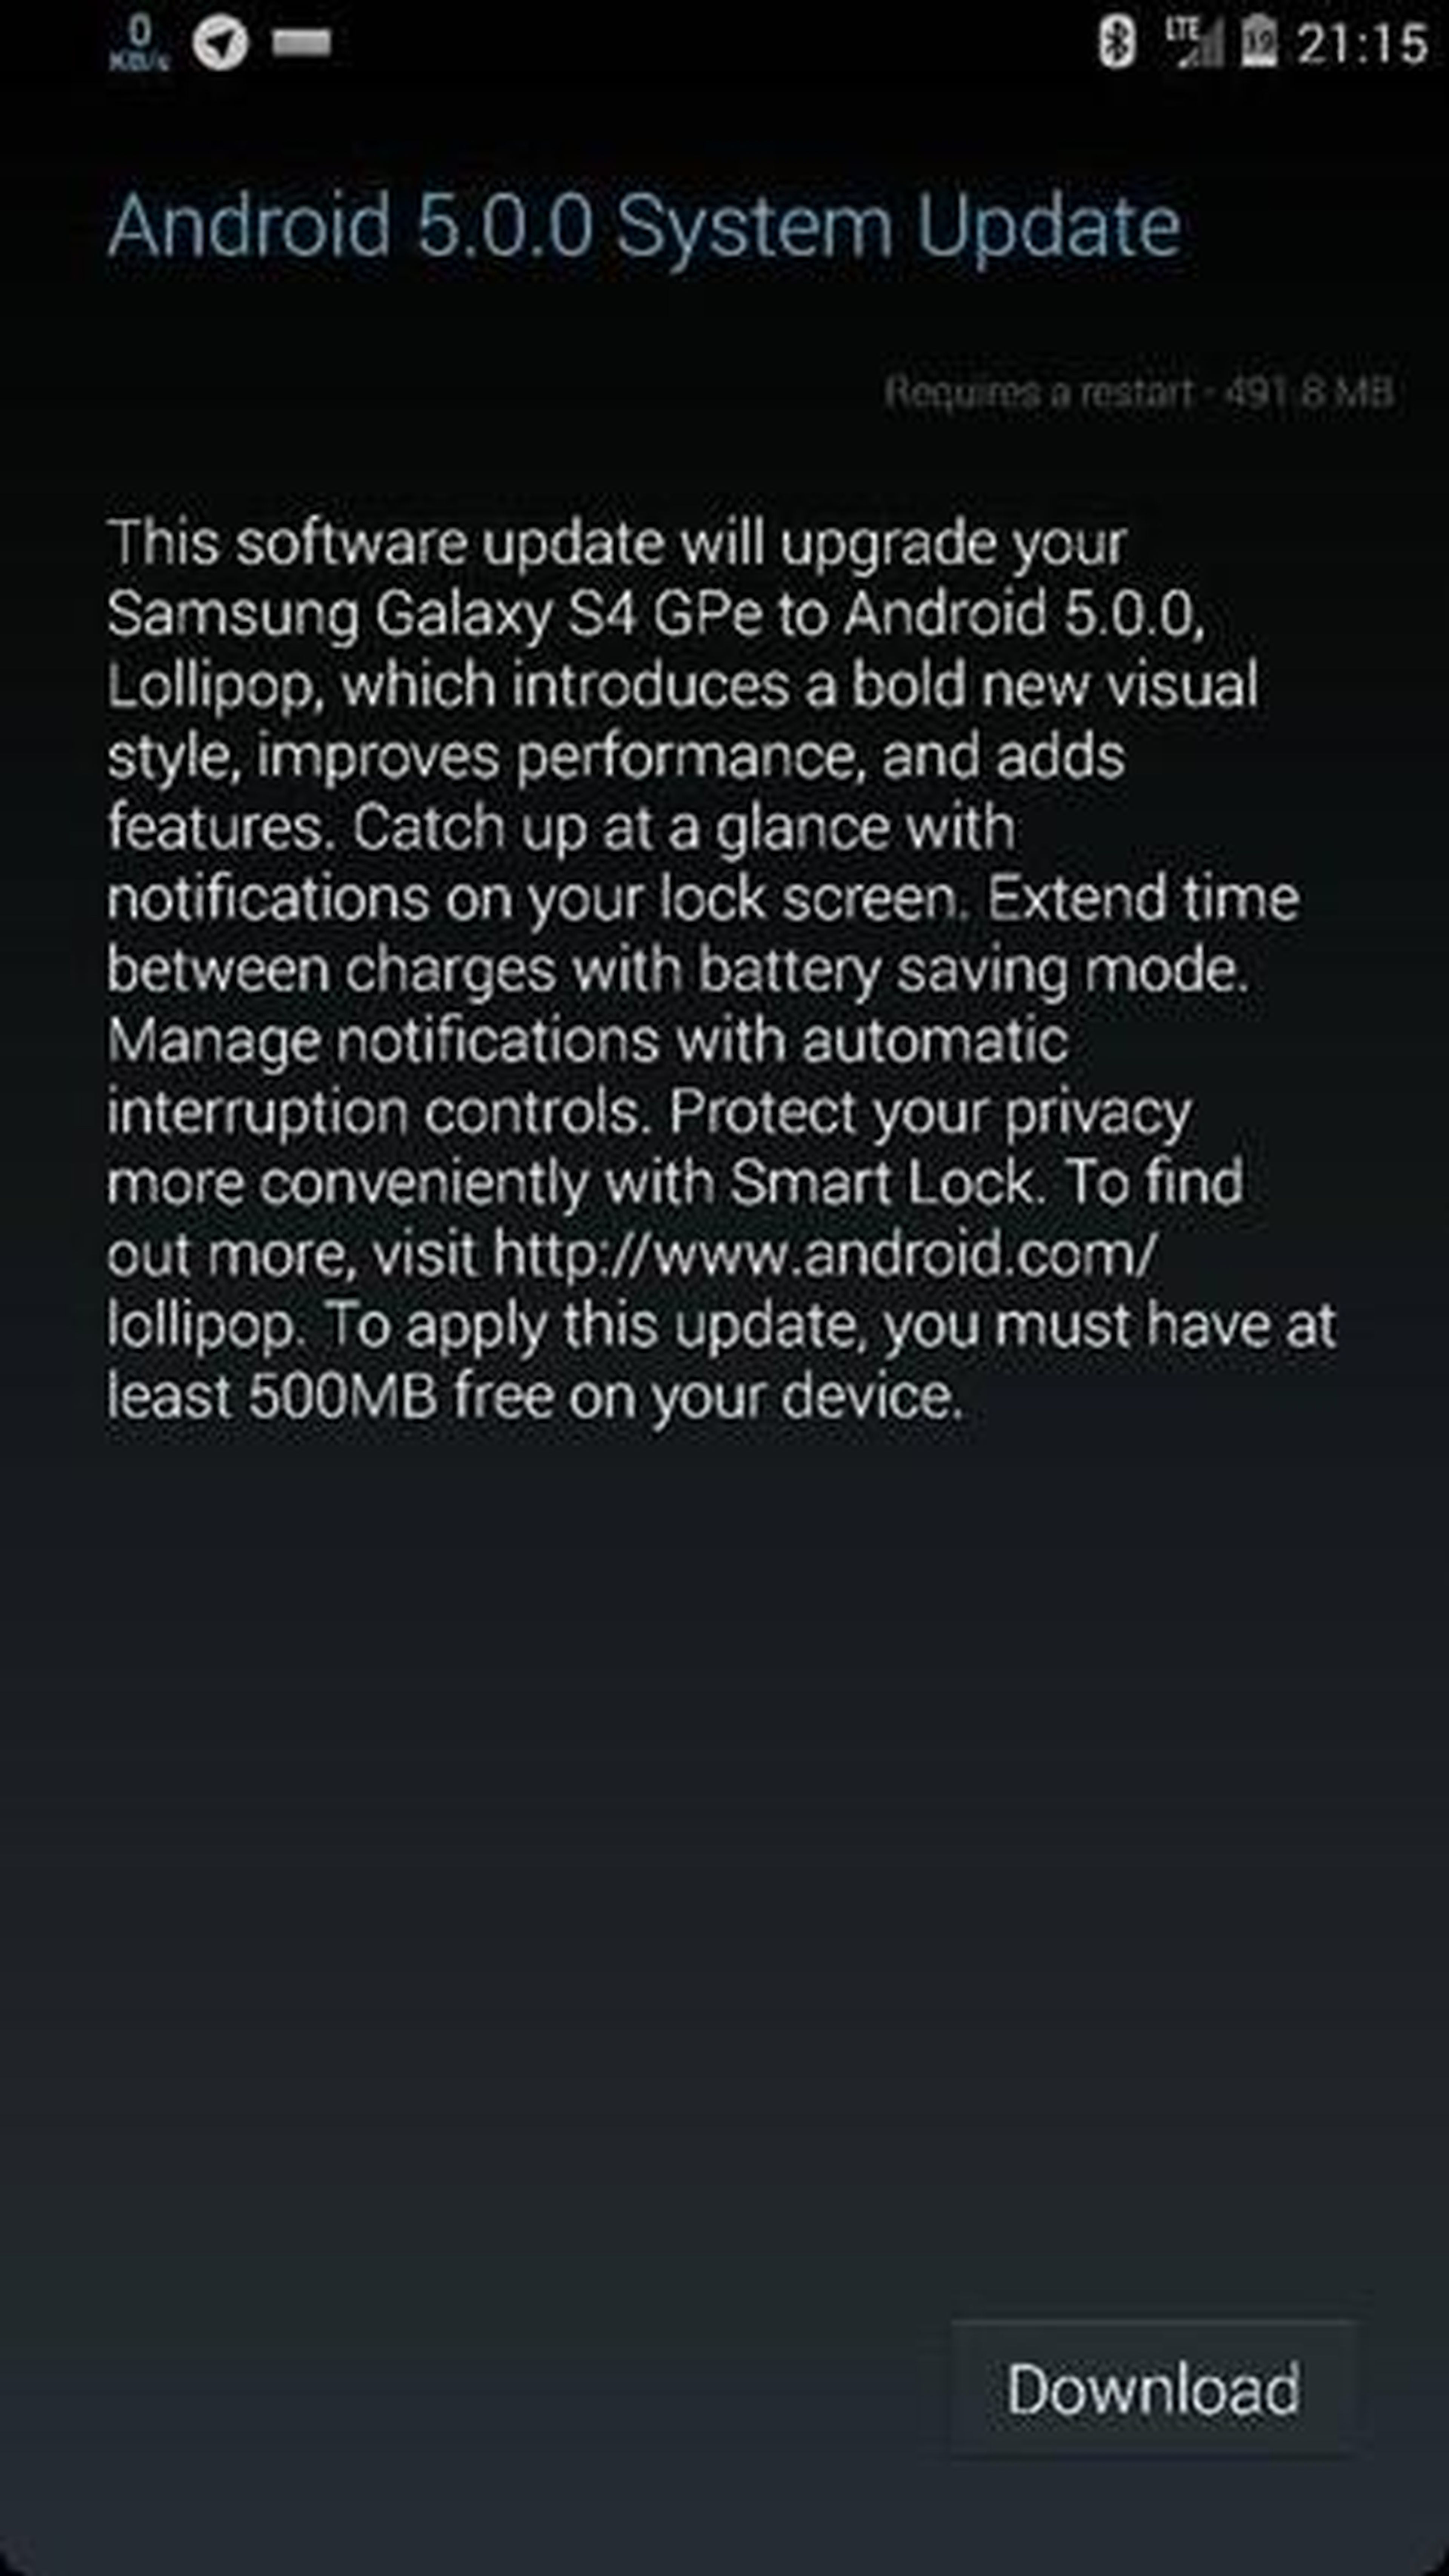 galaxy s4 android 5.0